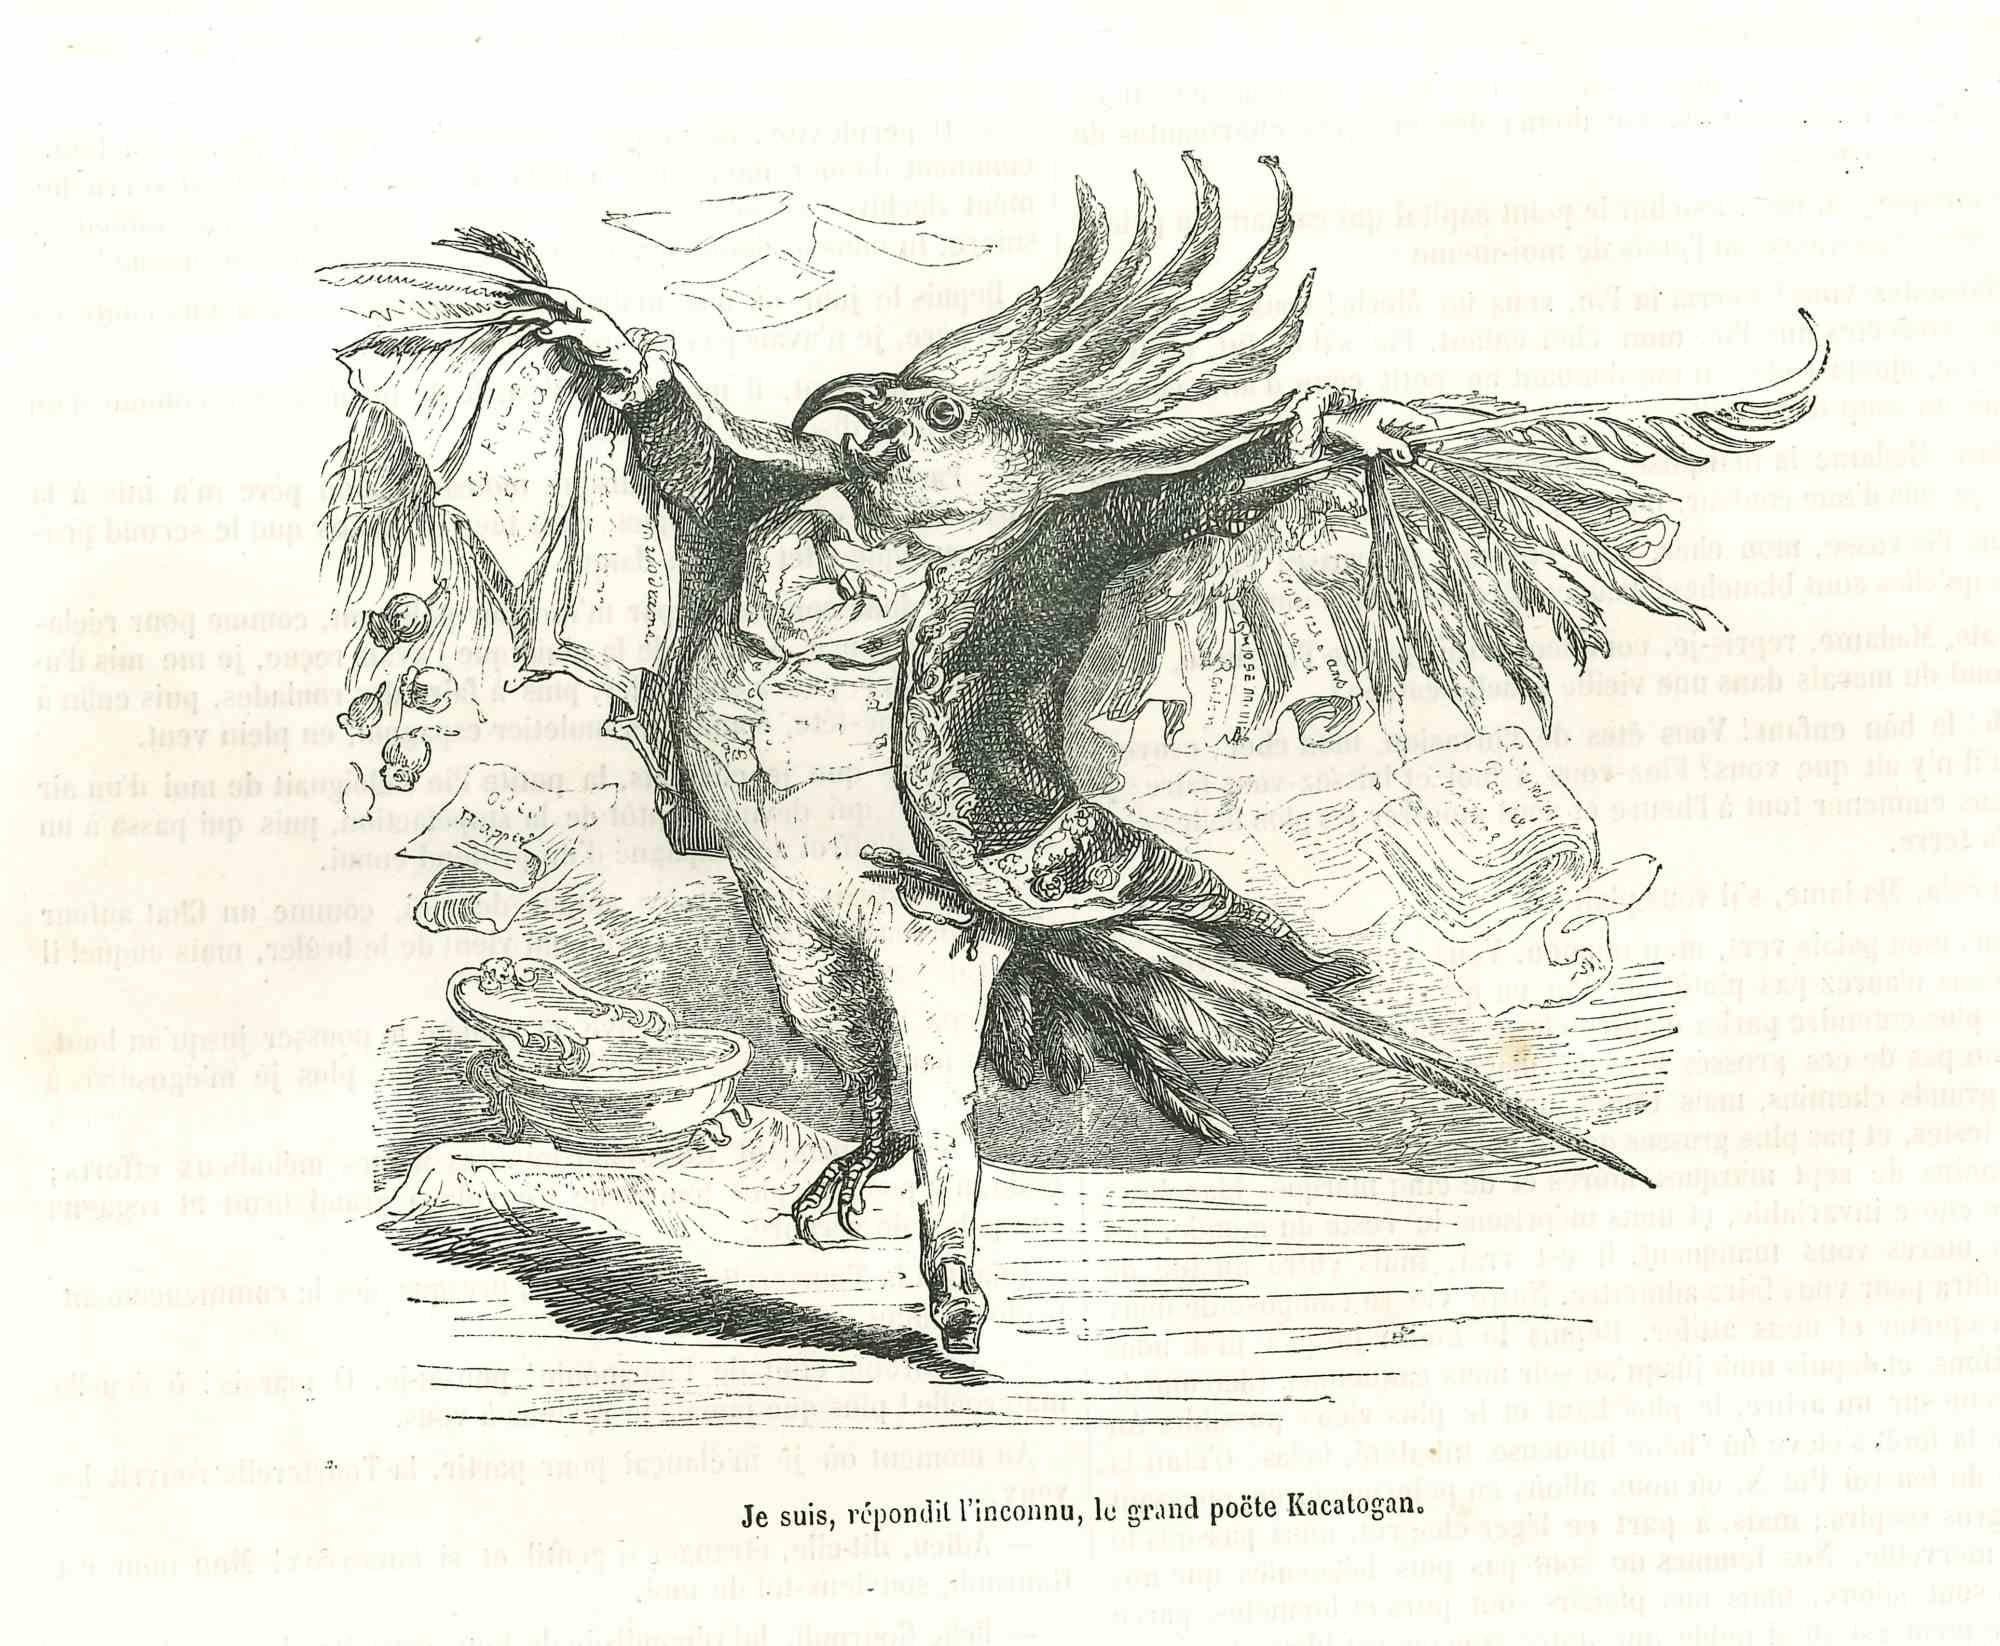 Jean Jeacques Grandville Figurative Print - The Great Poet Mr. Cockatoo with Papers - Lithograph by J.J Grandville - 1852